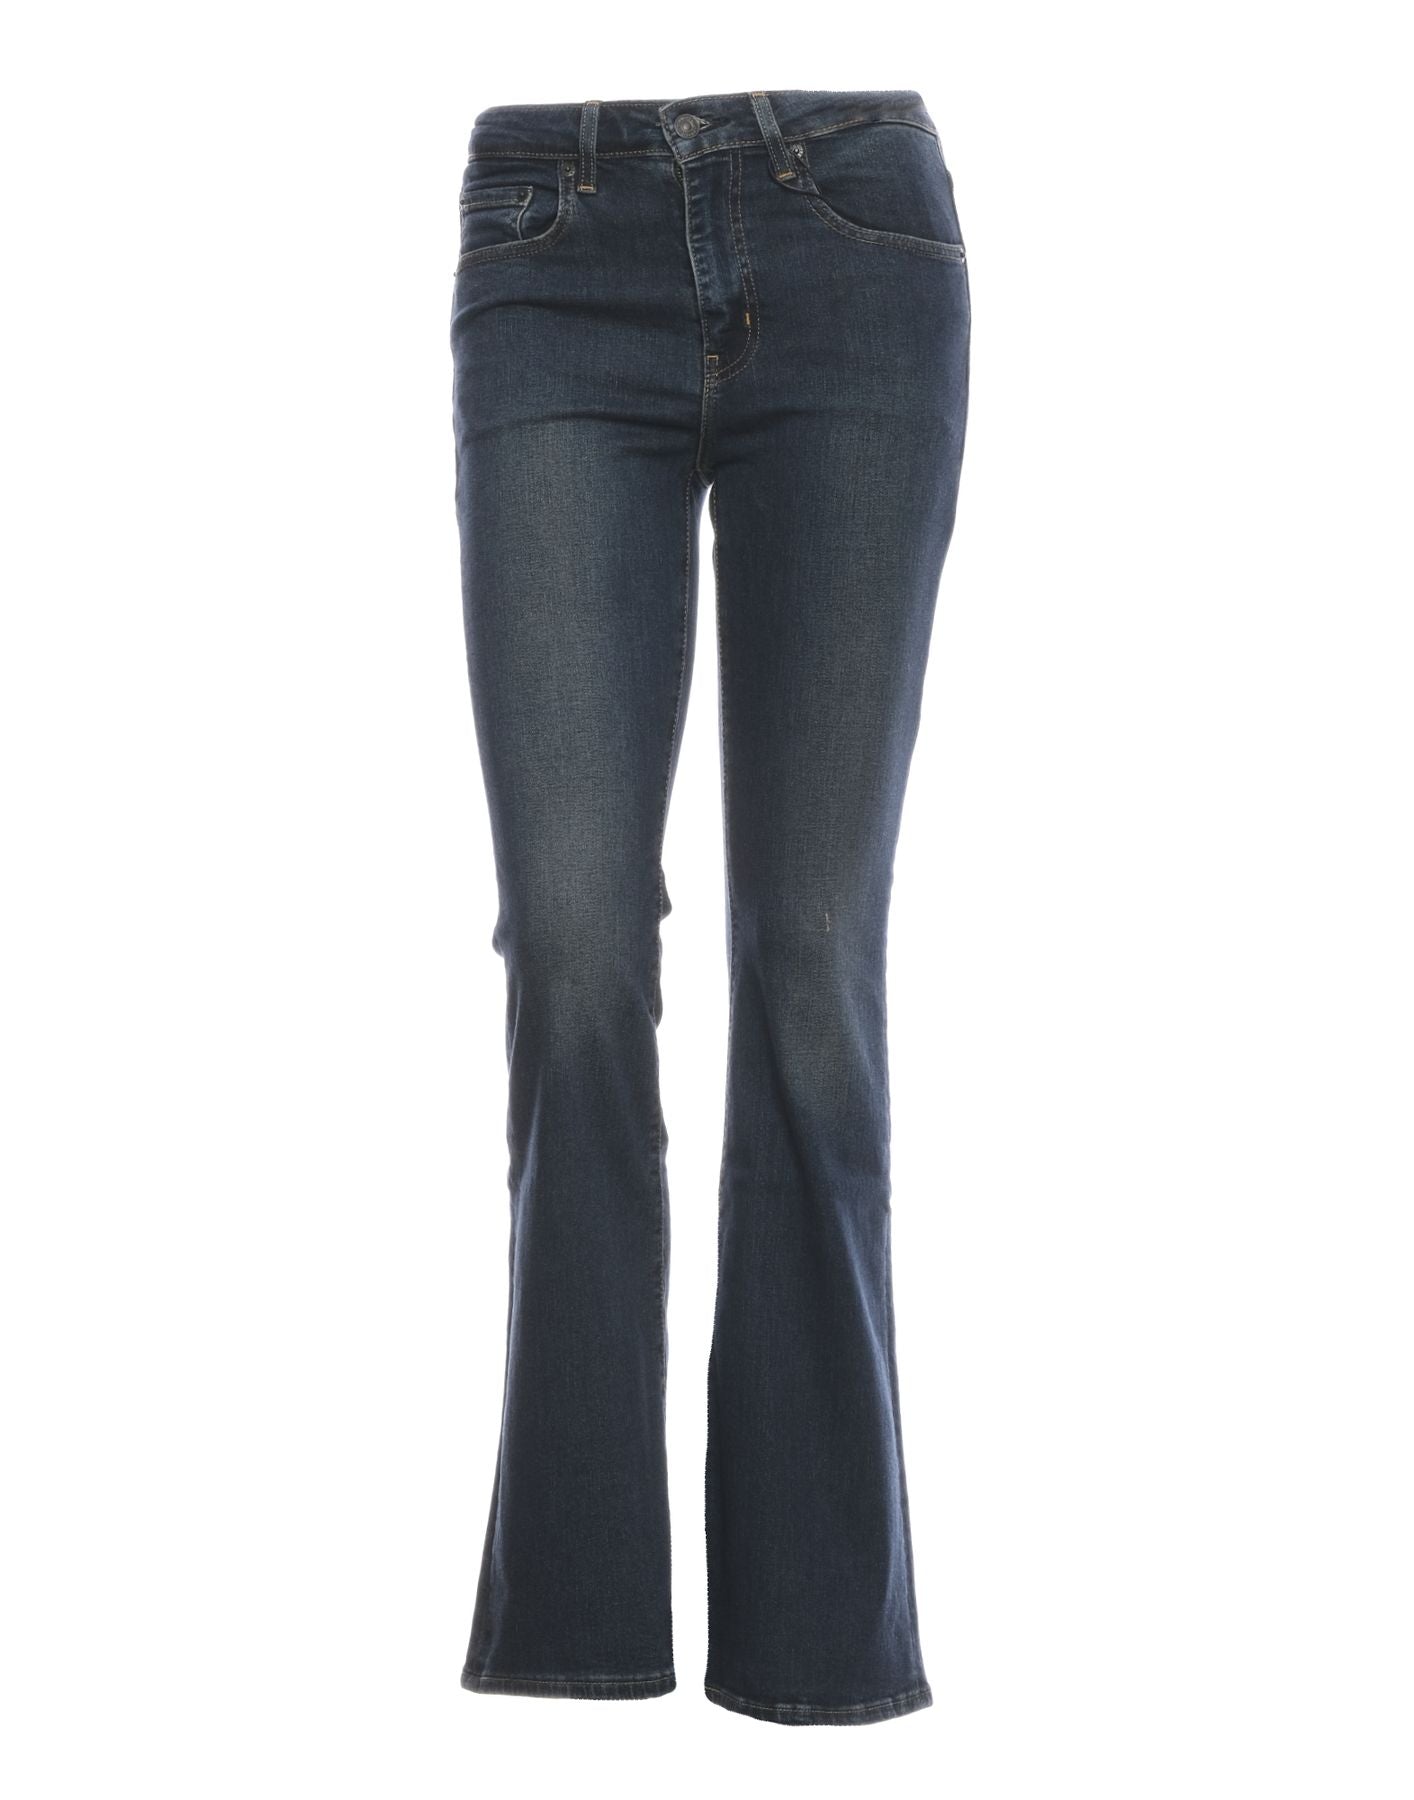 Jeans para mujer A34100014 Blue Swell Levi's